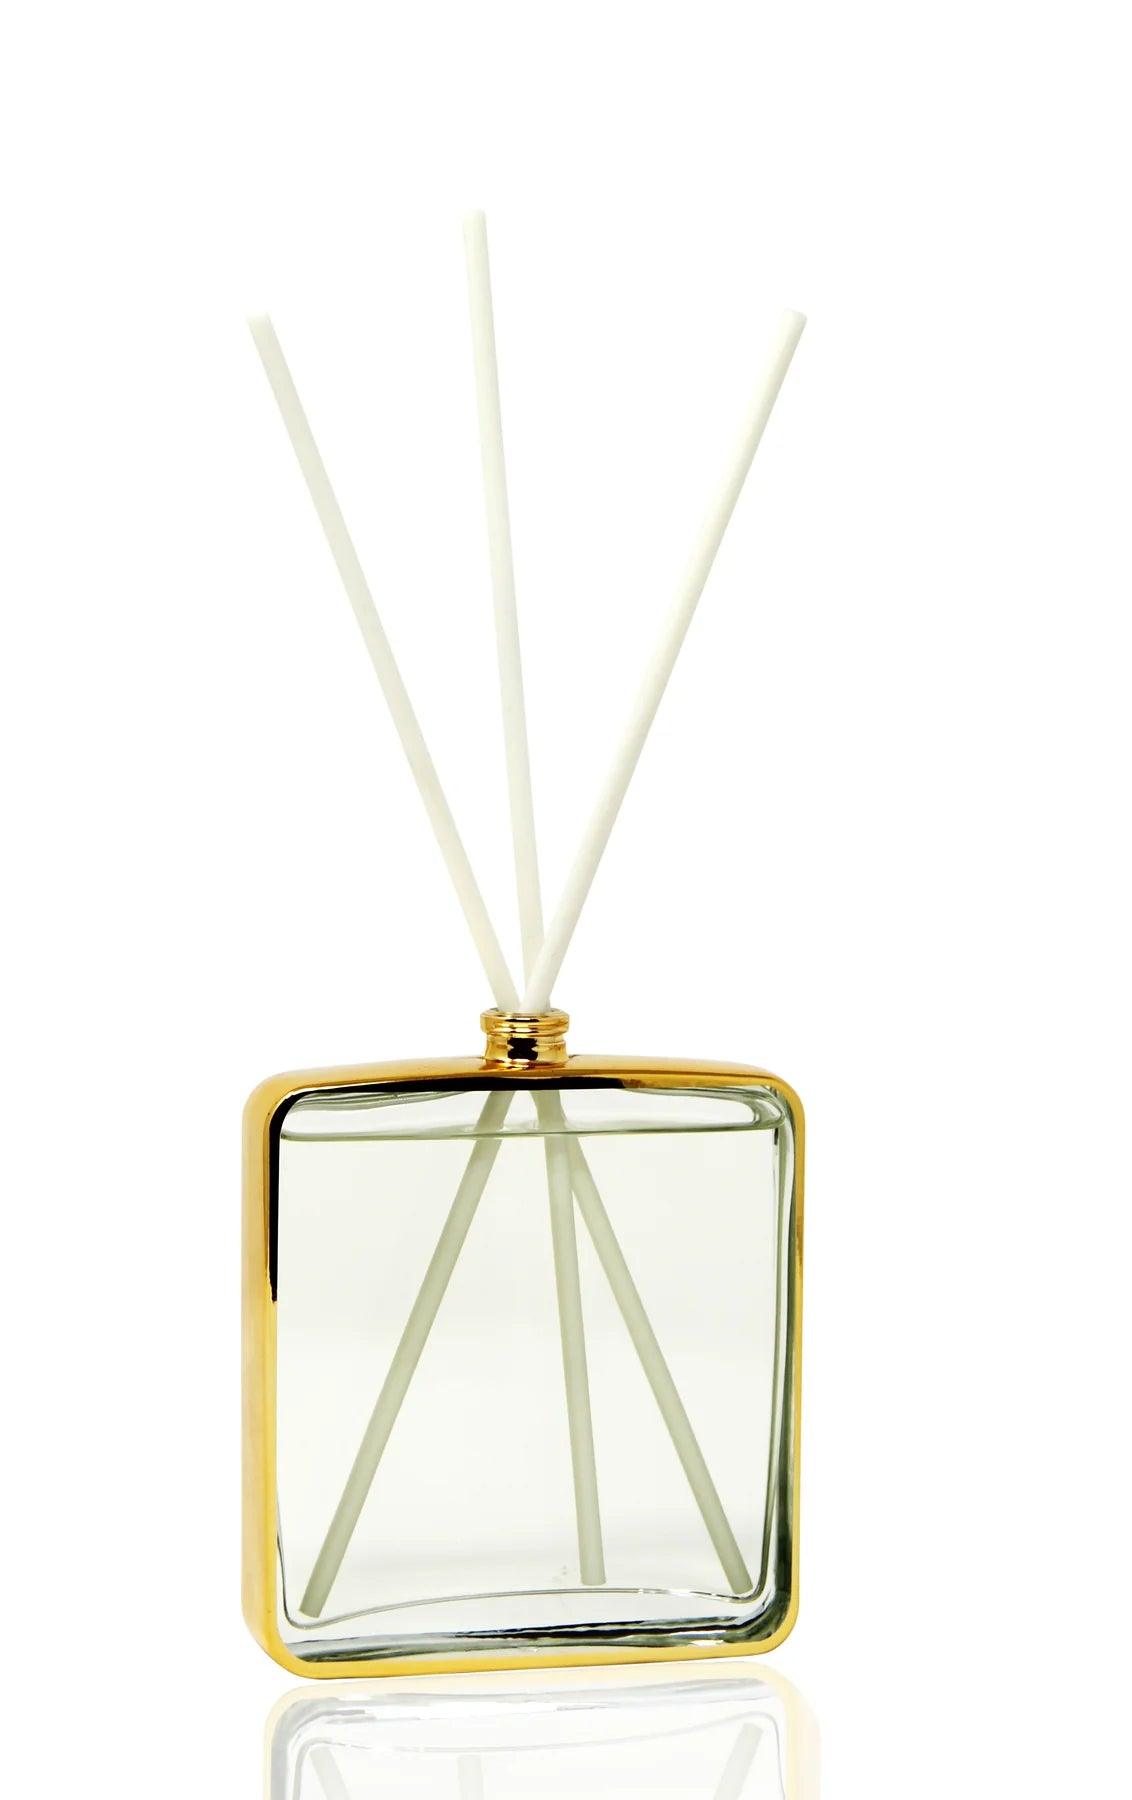 Gold Framed Square Shaped Diffuser, "Lily Of The Valley" Scent - Elegant Linen